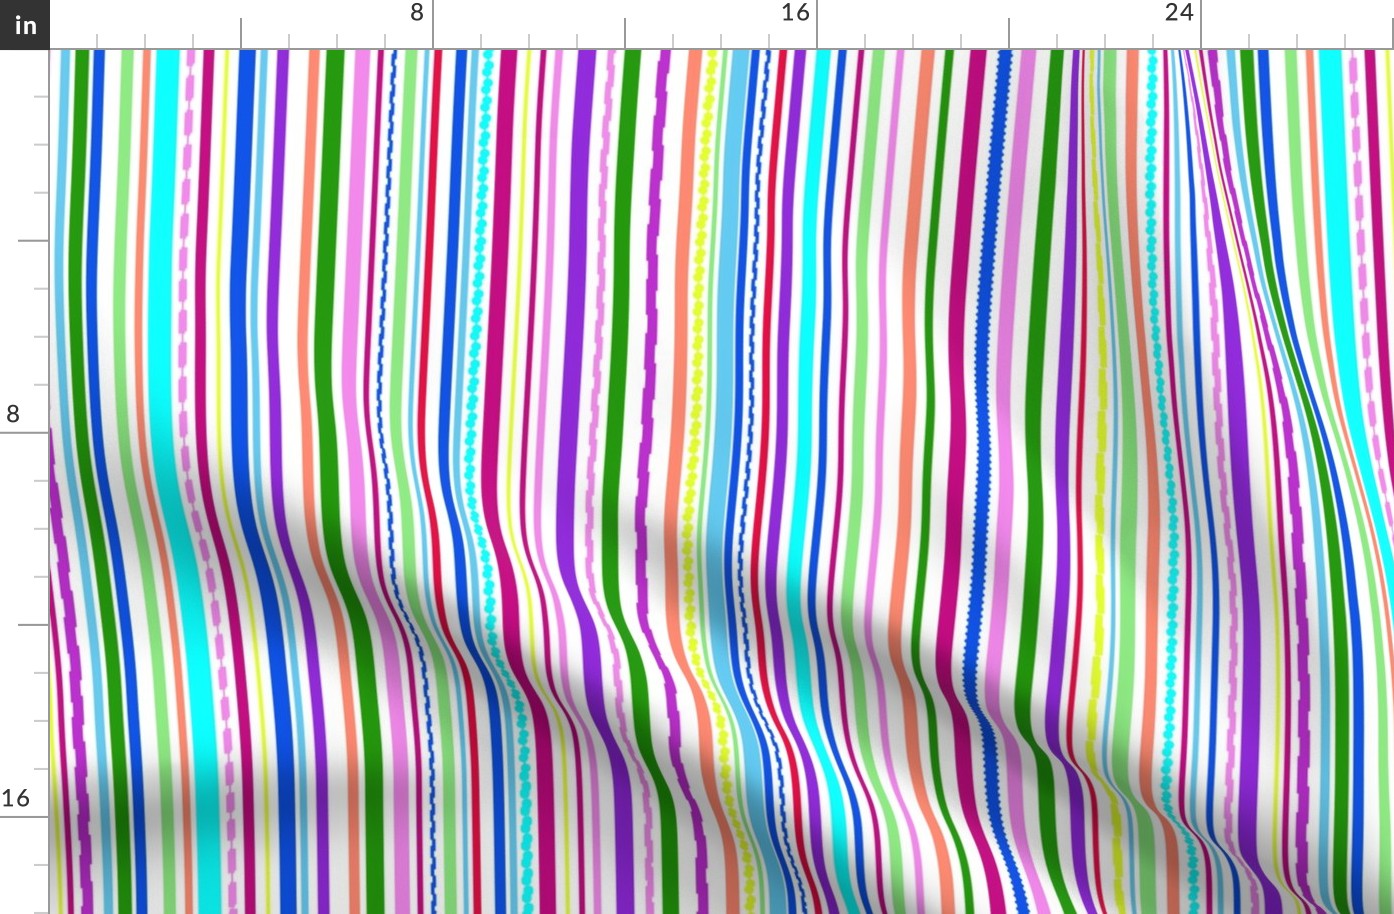 Rainbow, Stripes, Summer, Spring, Easter, Valentines Day, Striped, Girls, Bright, JG Anchor Designs, Barbiecore